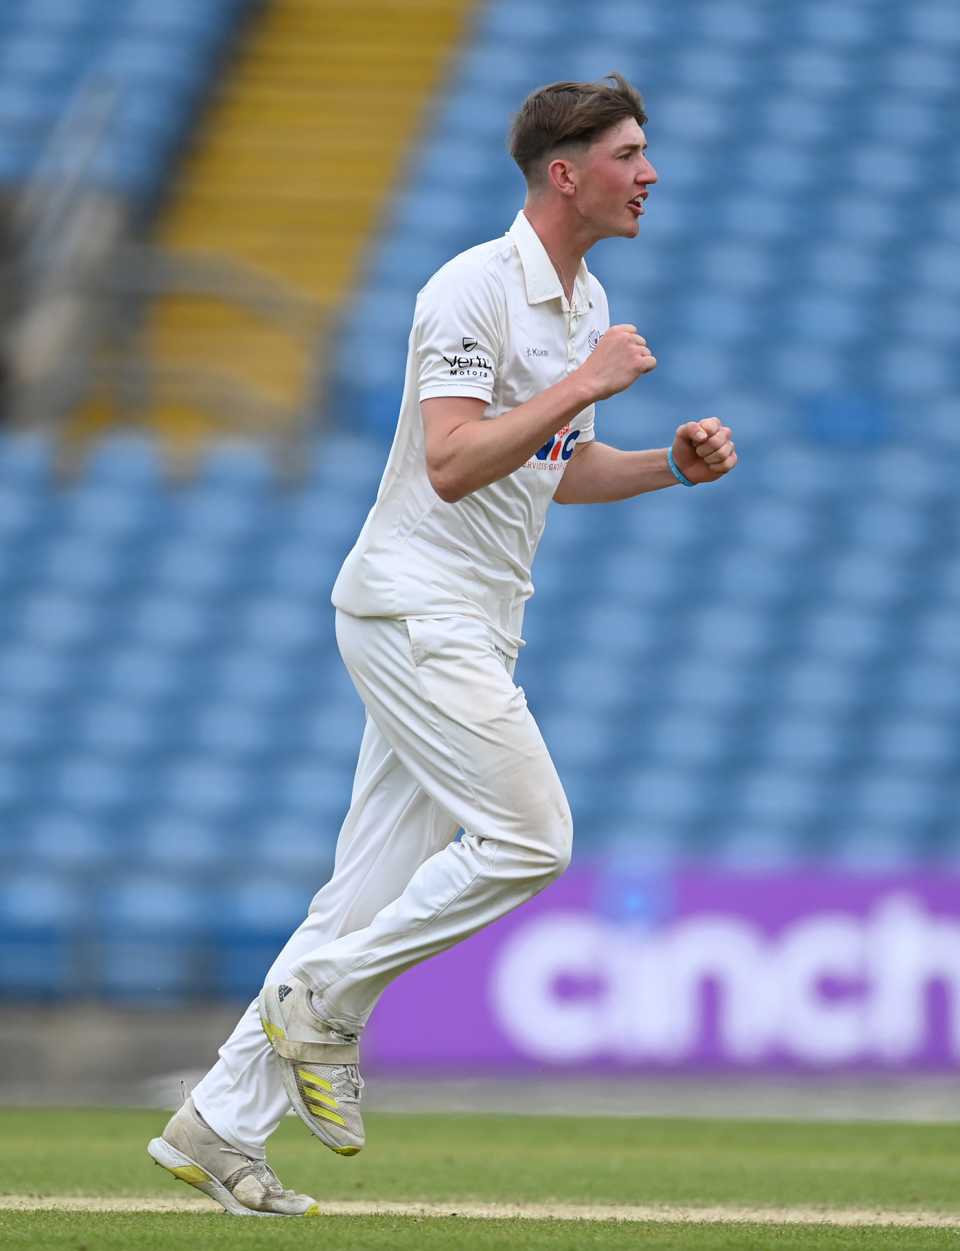 George Hill celebrates success with the ball, Kent vs Yorkshire, LV= County Championship, Headingley, May 1, 2022